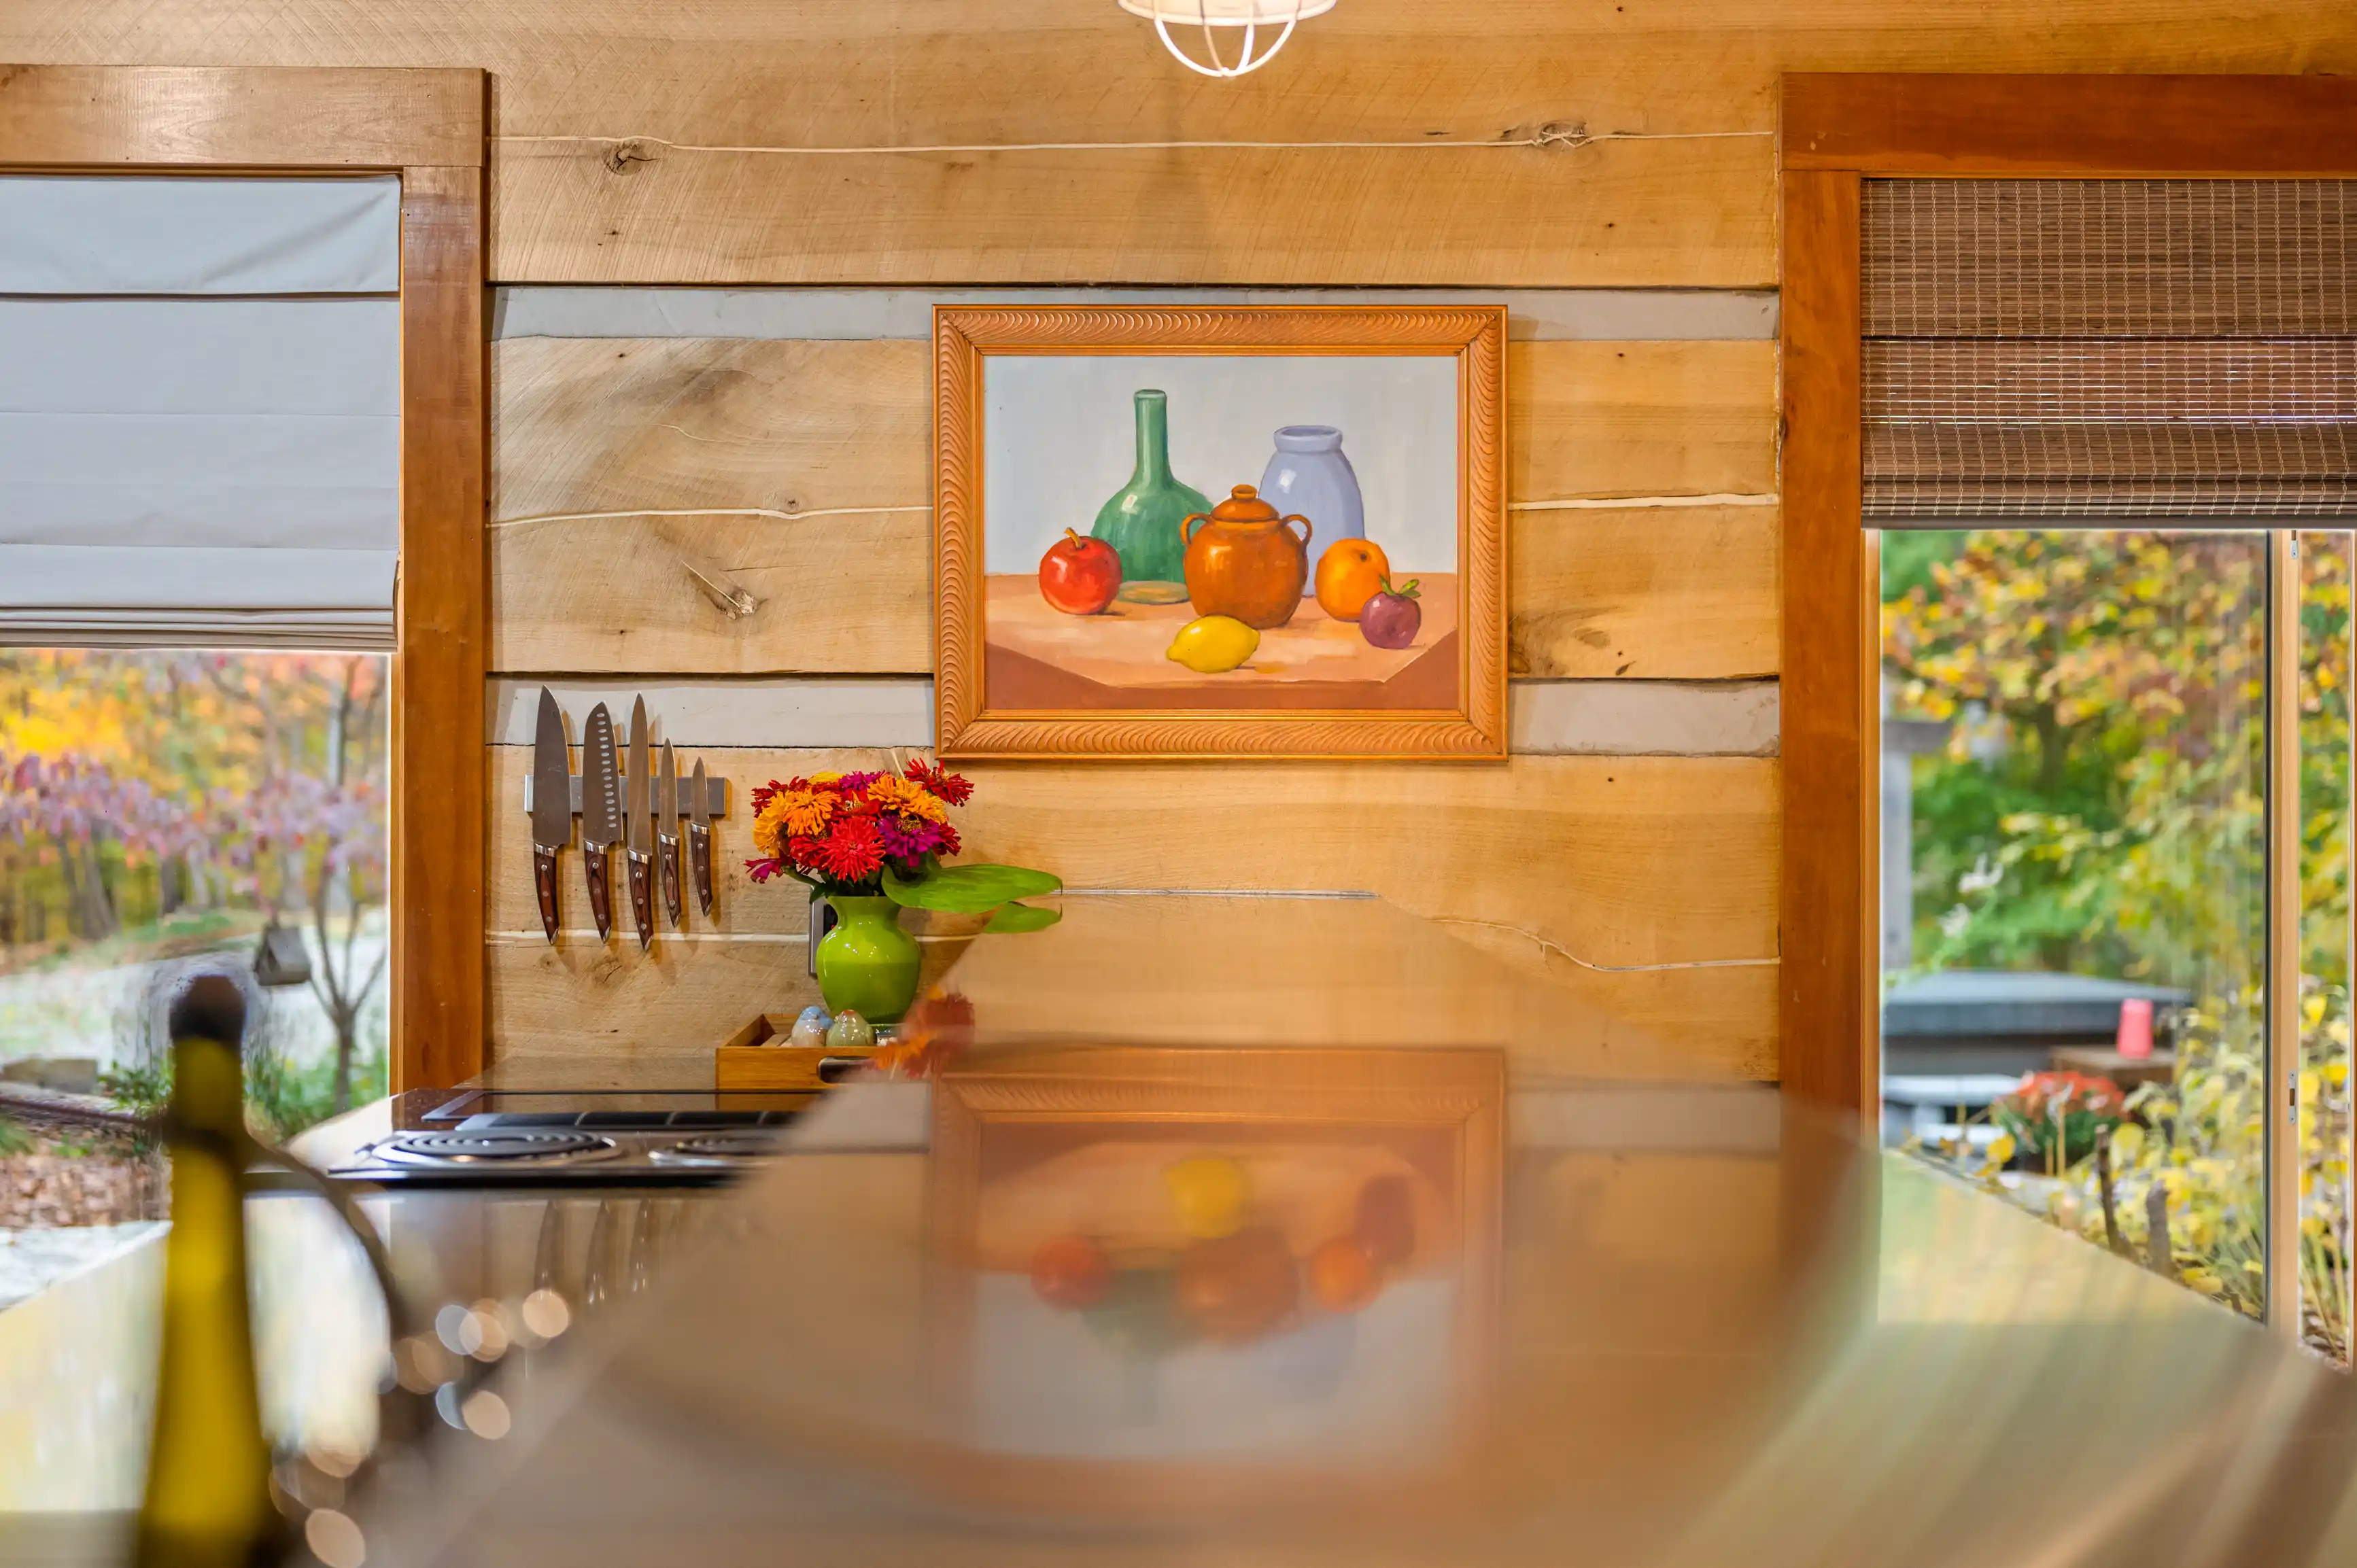 Warm-toned rustic kitchen with a framed still-life painting, knife set on wood wall, red flowers in a green vase, and autumn foliage visible through the window.